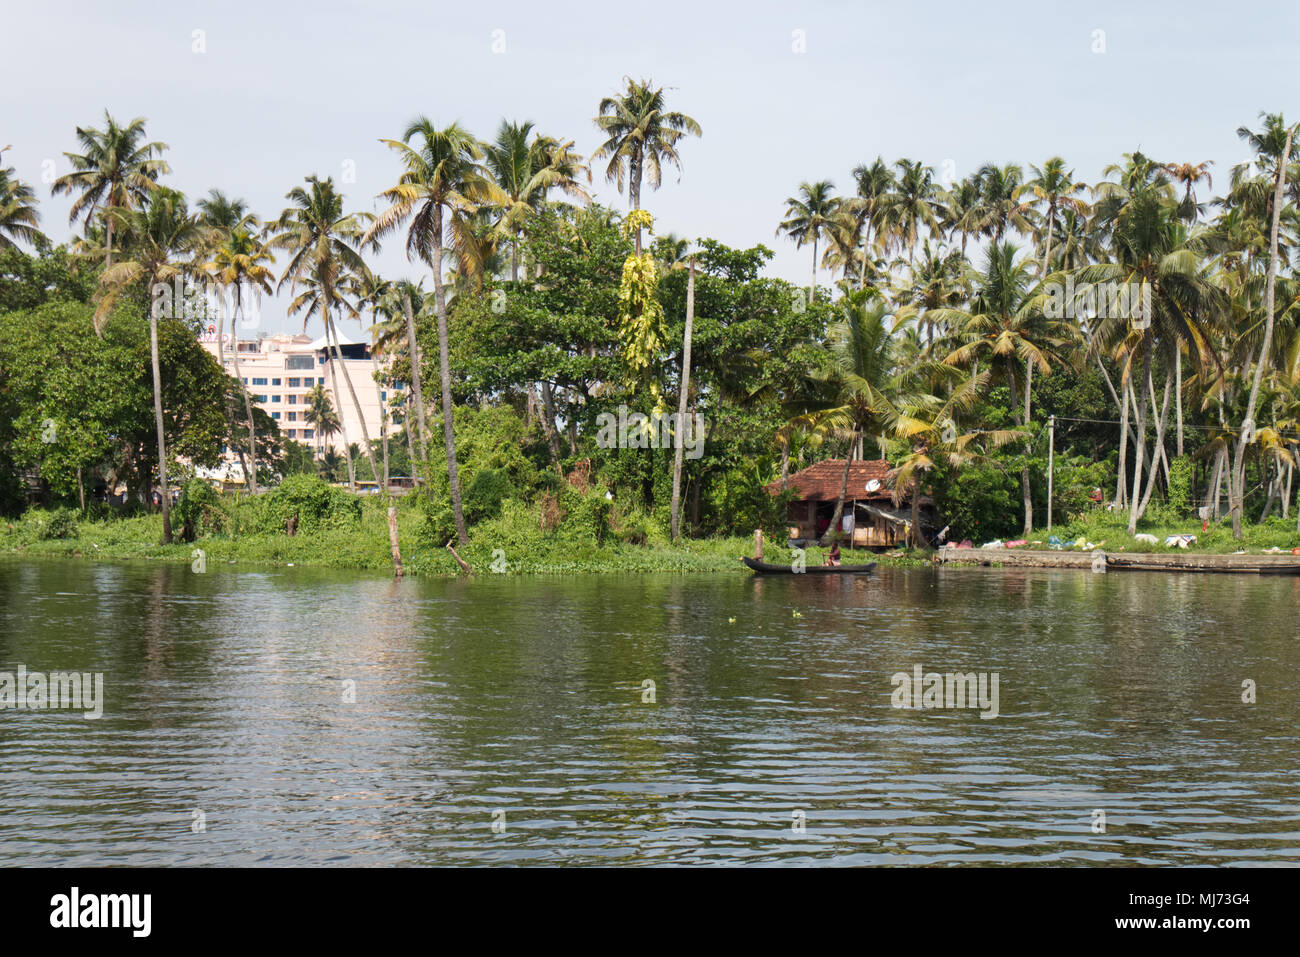 The banks of the waterways of Alappuzha in the state of Kerala, India. Stock Photo